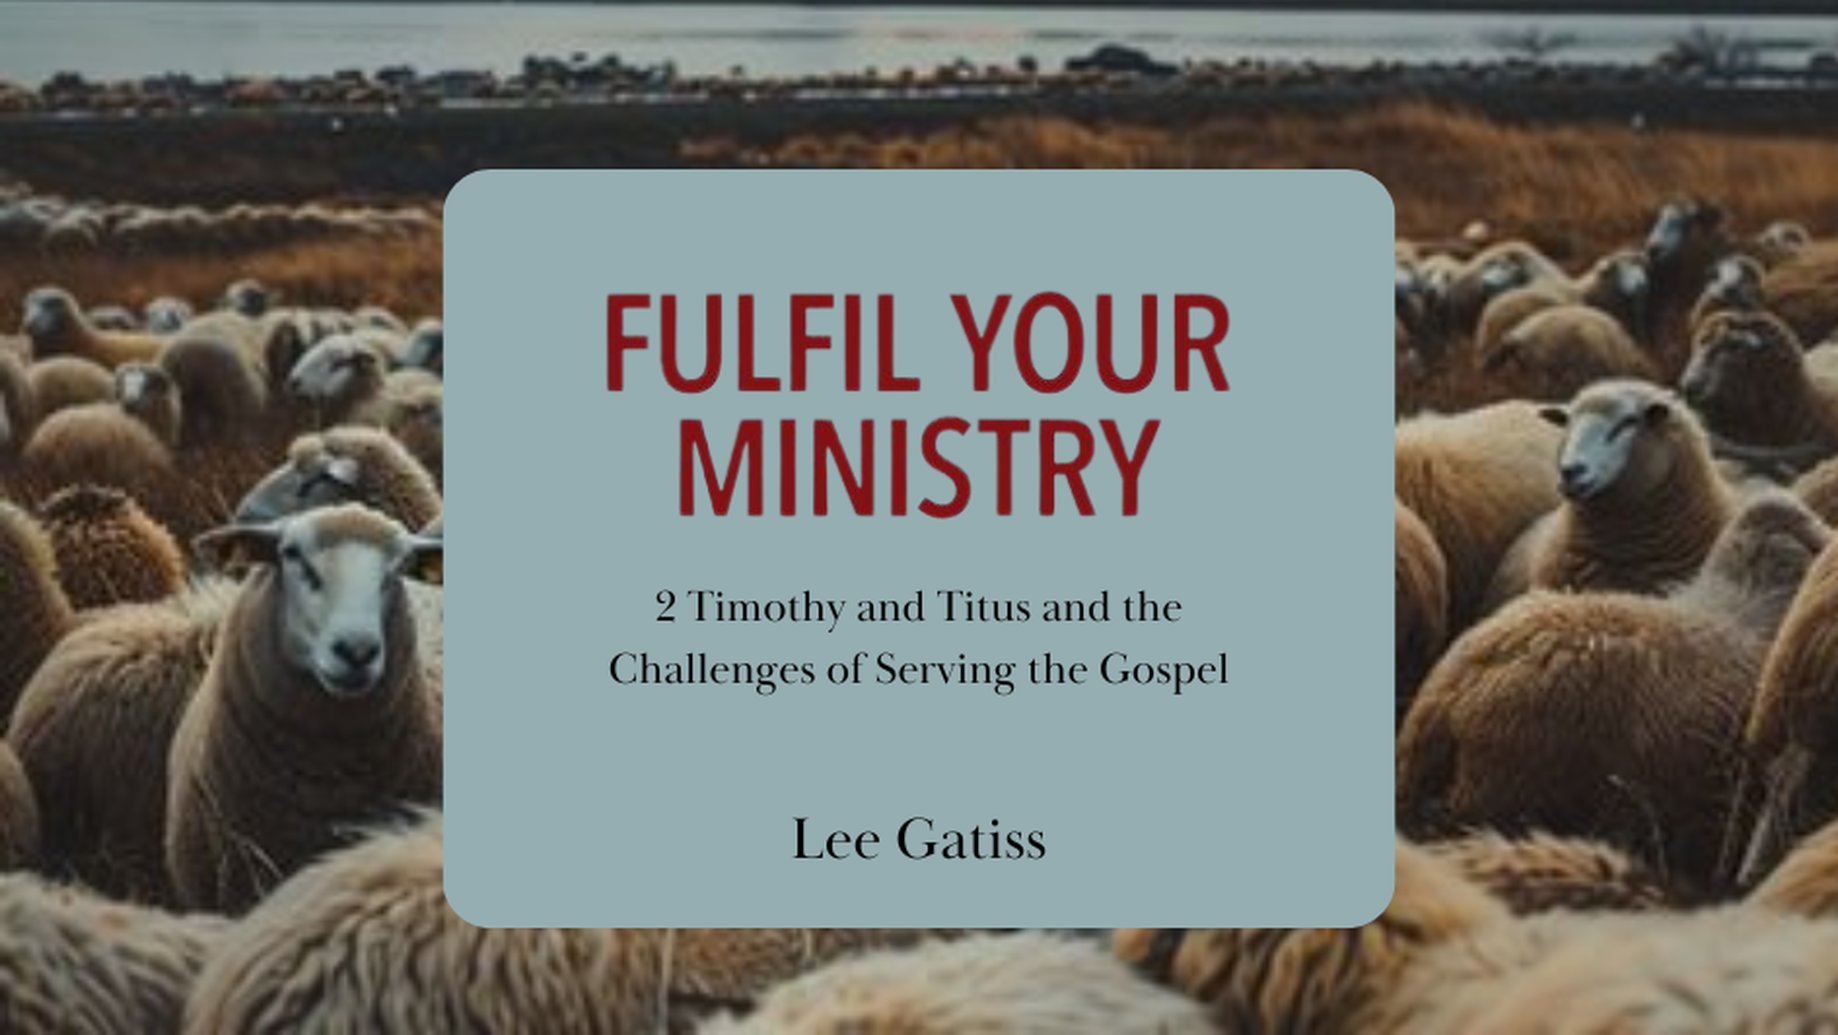 Fulfil your ministry, in difficult days